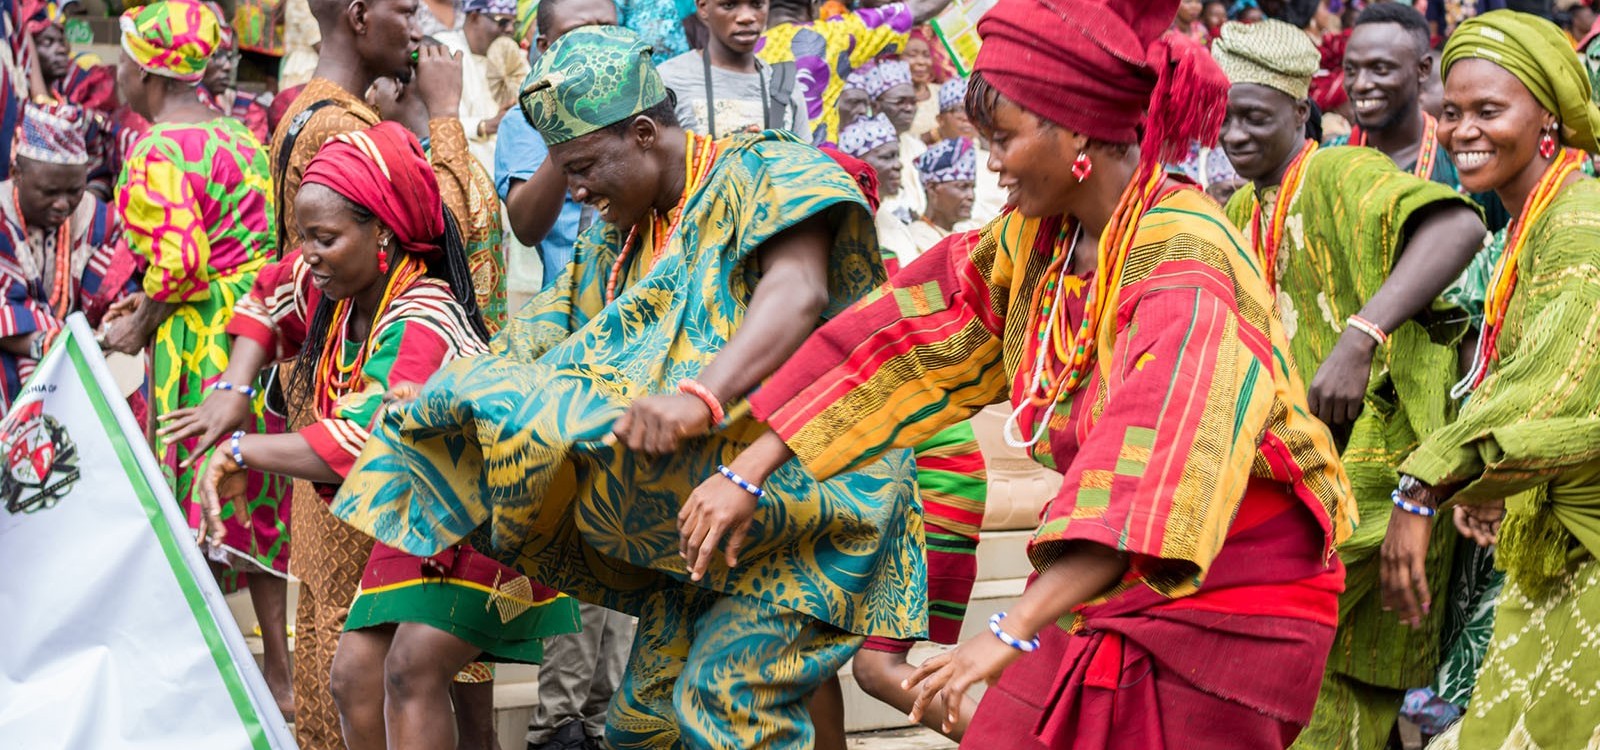 Nigerian cultural troupe dancing in traditional dress